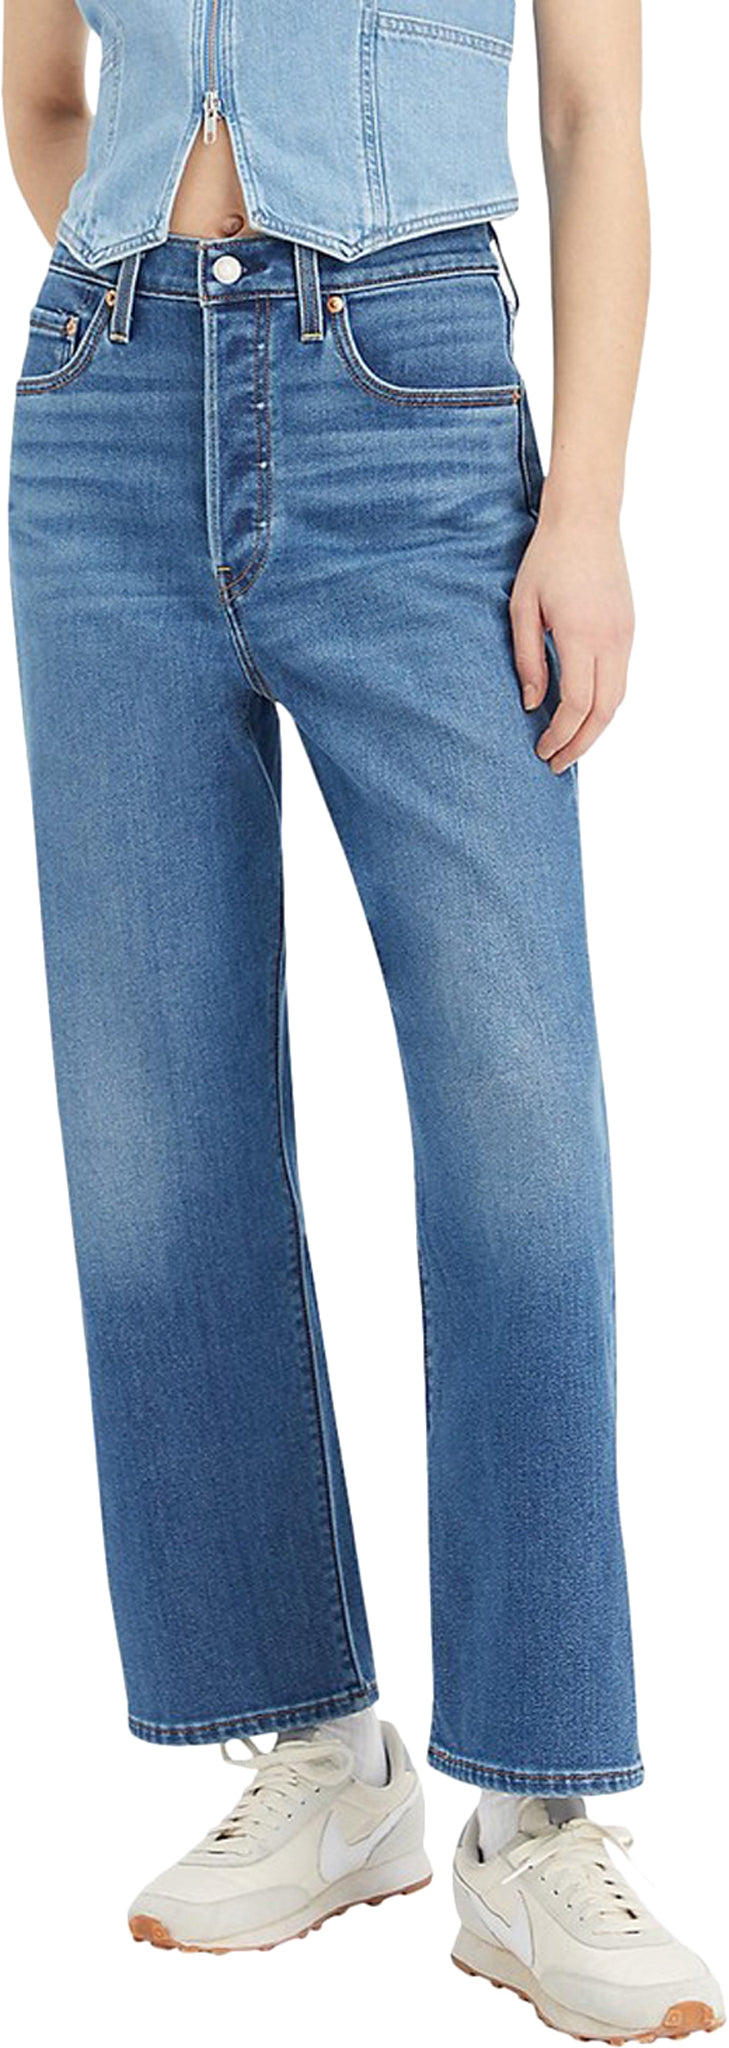 Ribcage Straight Ankle Jeans by Levi's for $30